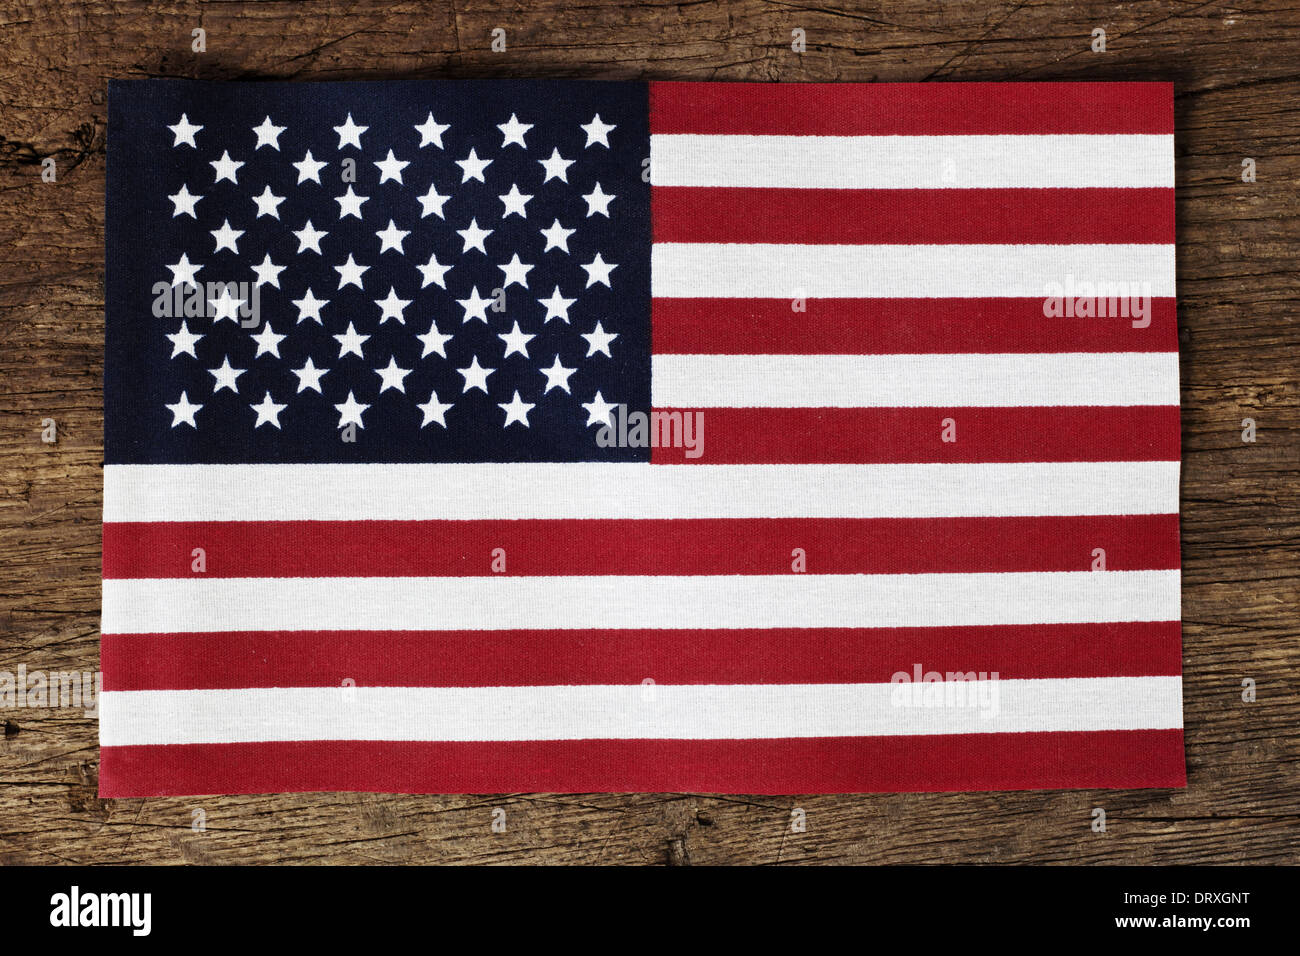 Flag of the United States on wooden background Stock Photo